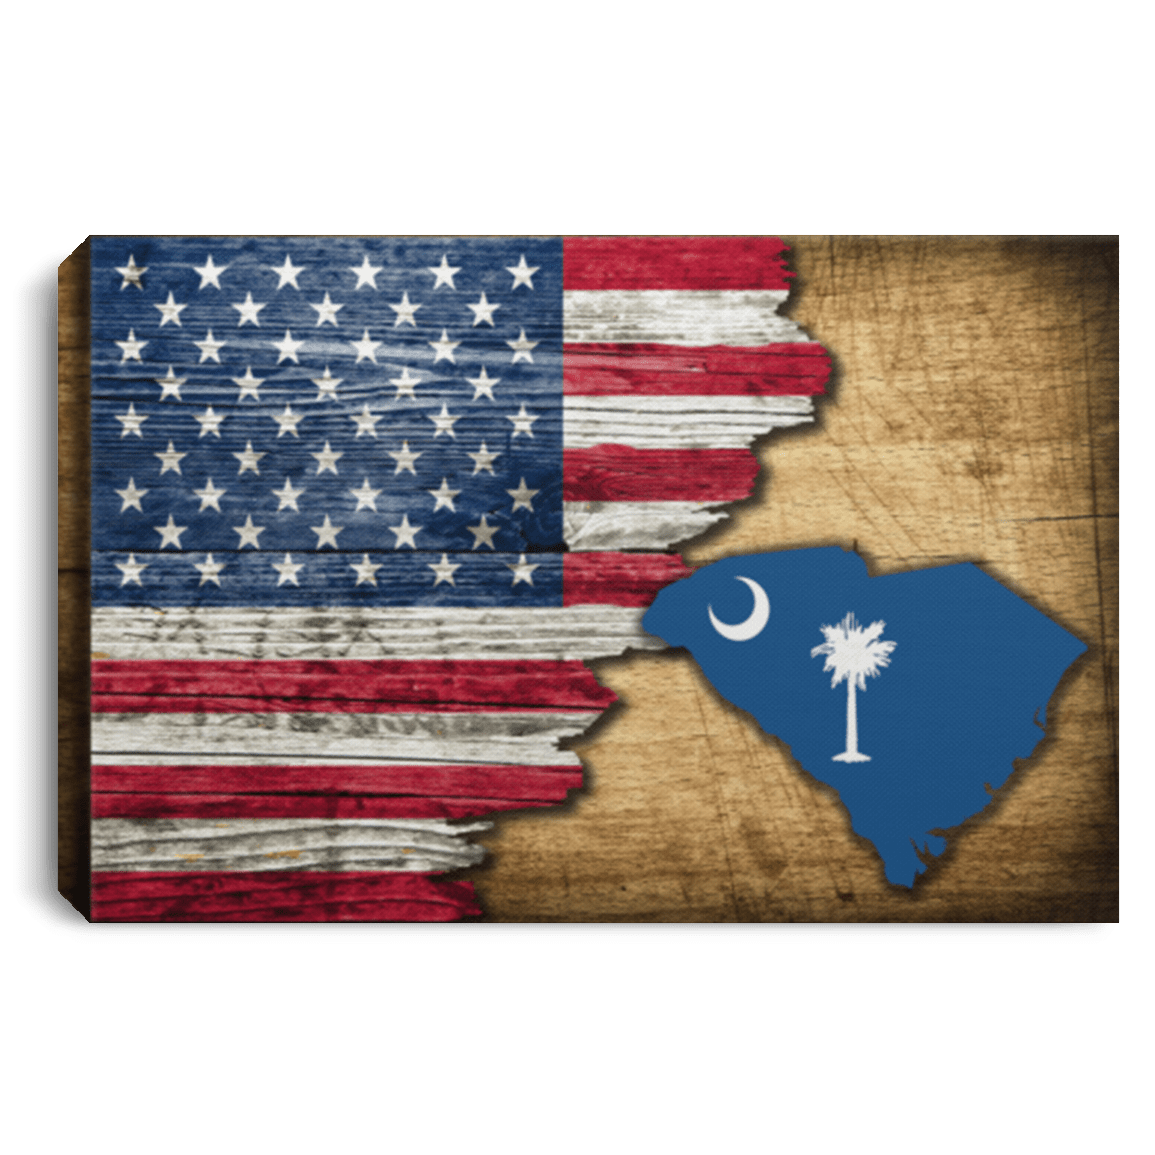 United States/Sourth Carolina Flag Ripped Effect 12X8 Inches Landscape Canvas .75In Frame